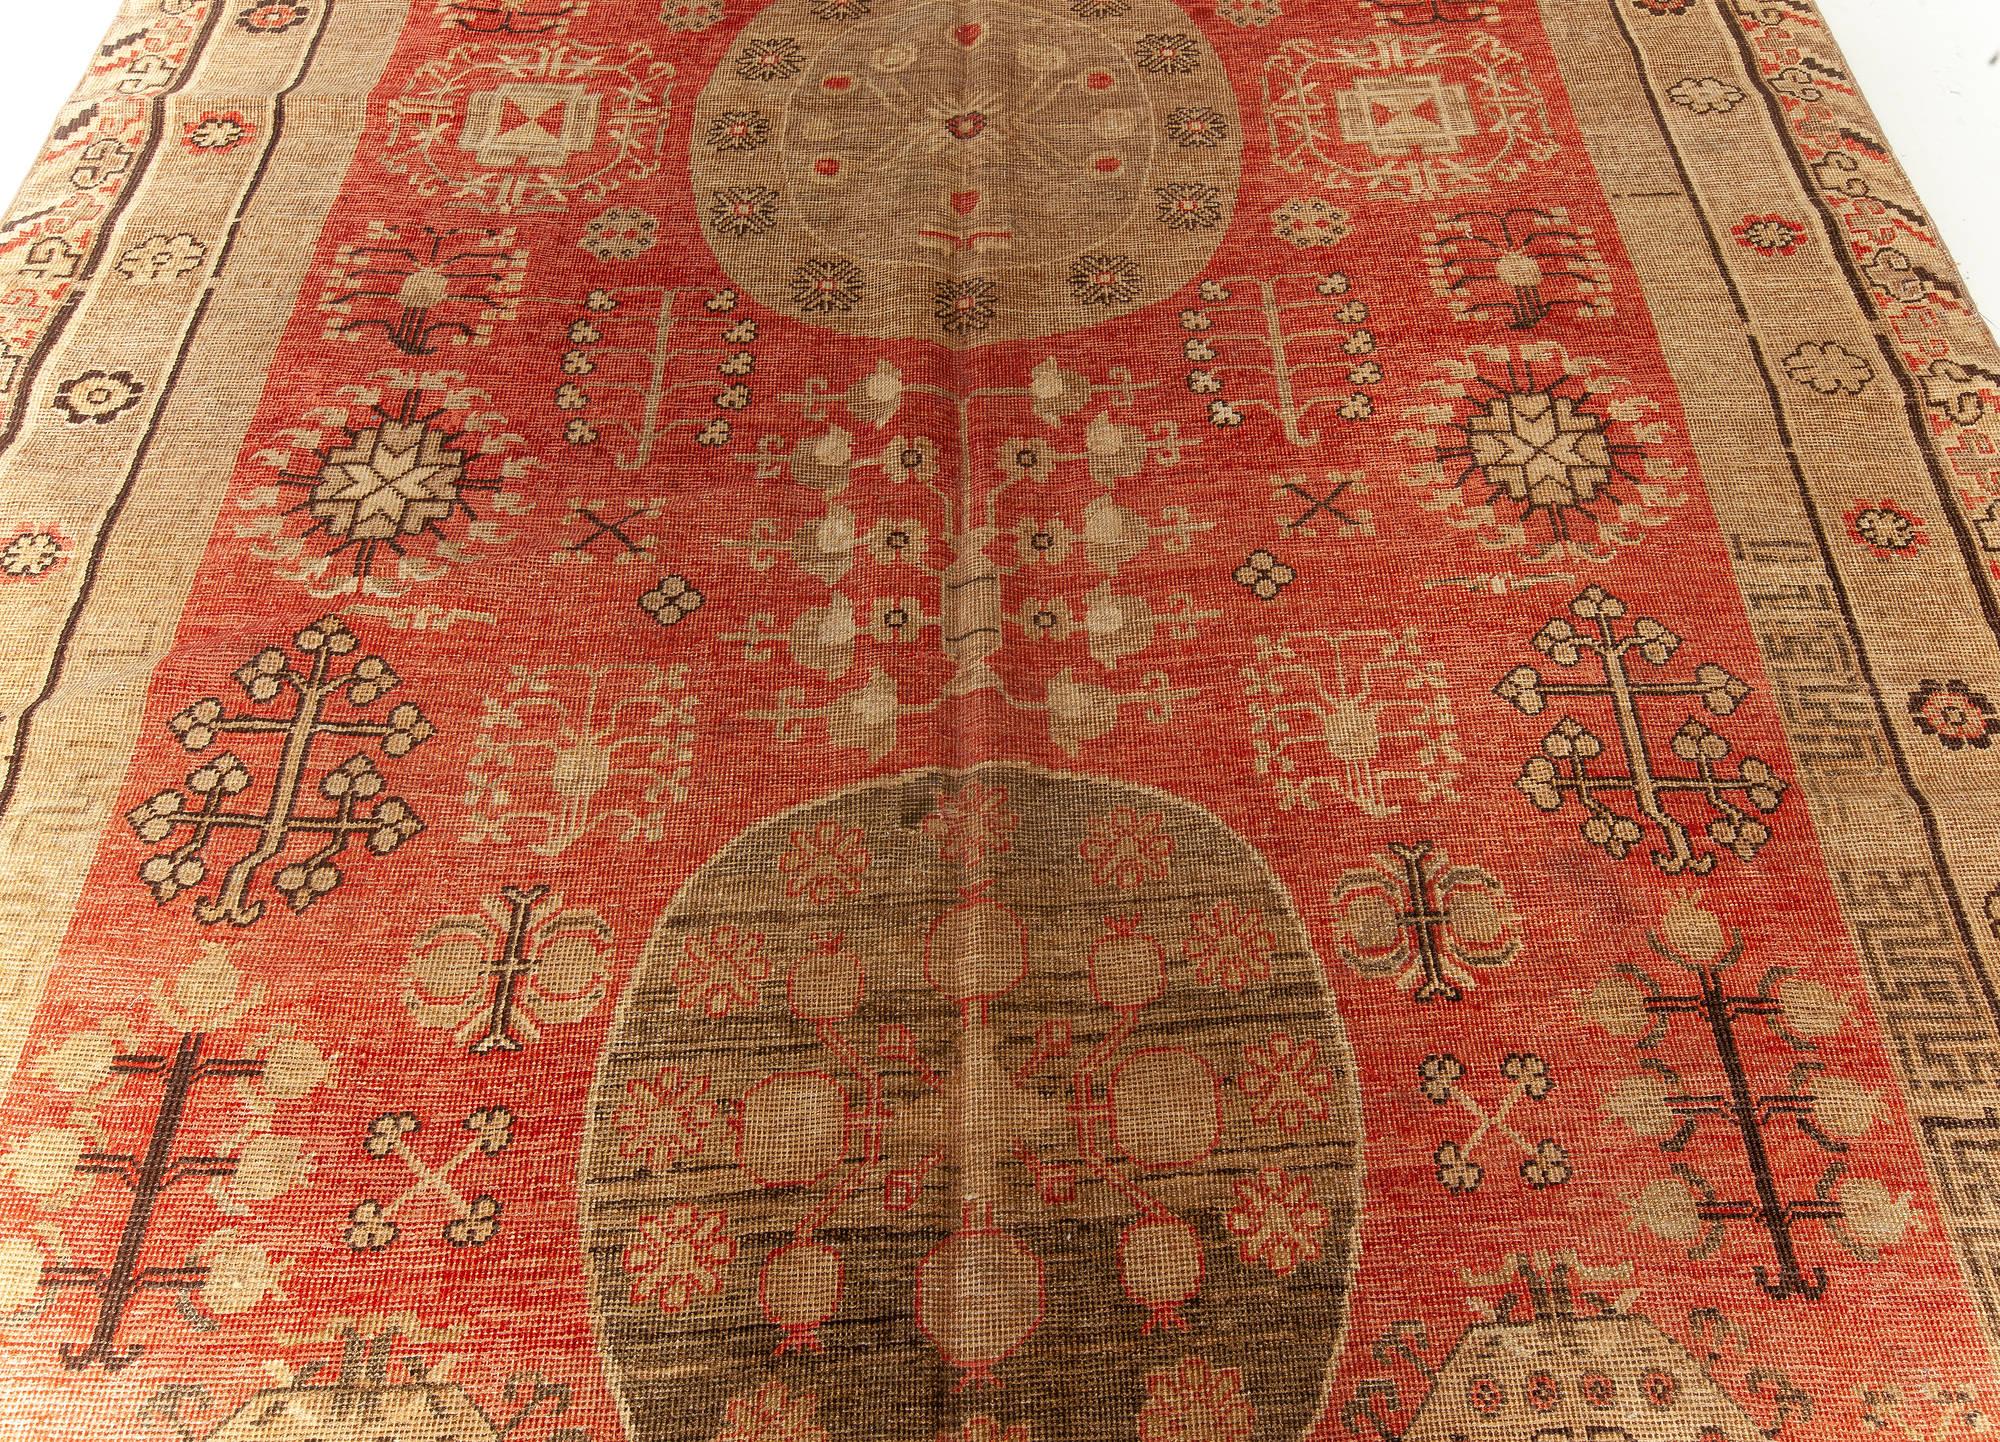 Midcentury Samarkand red and brown handmade wool rug.
Size: 6'4